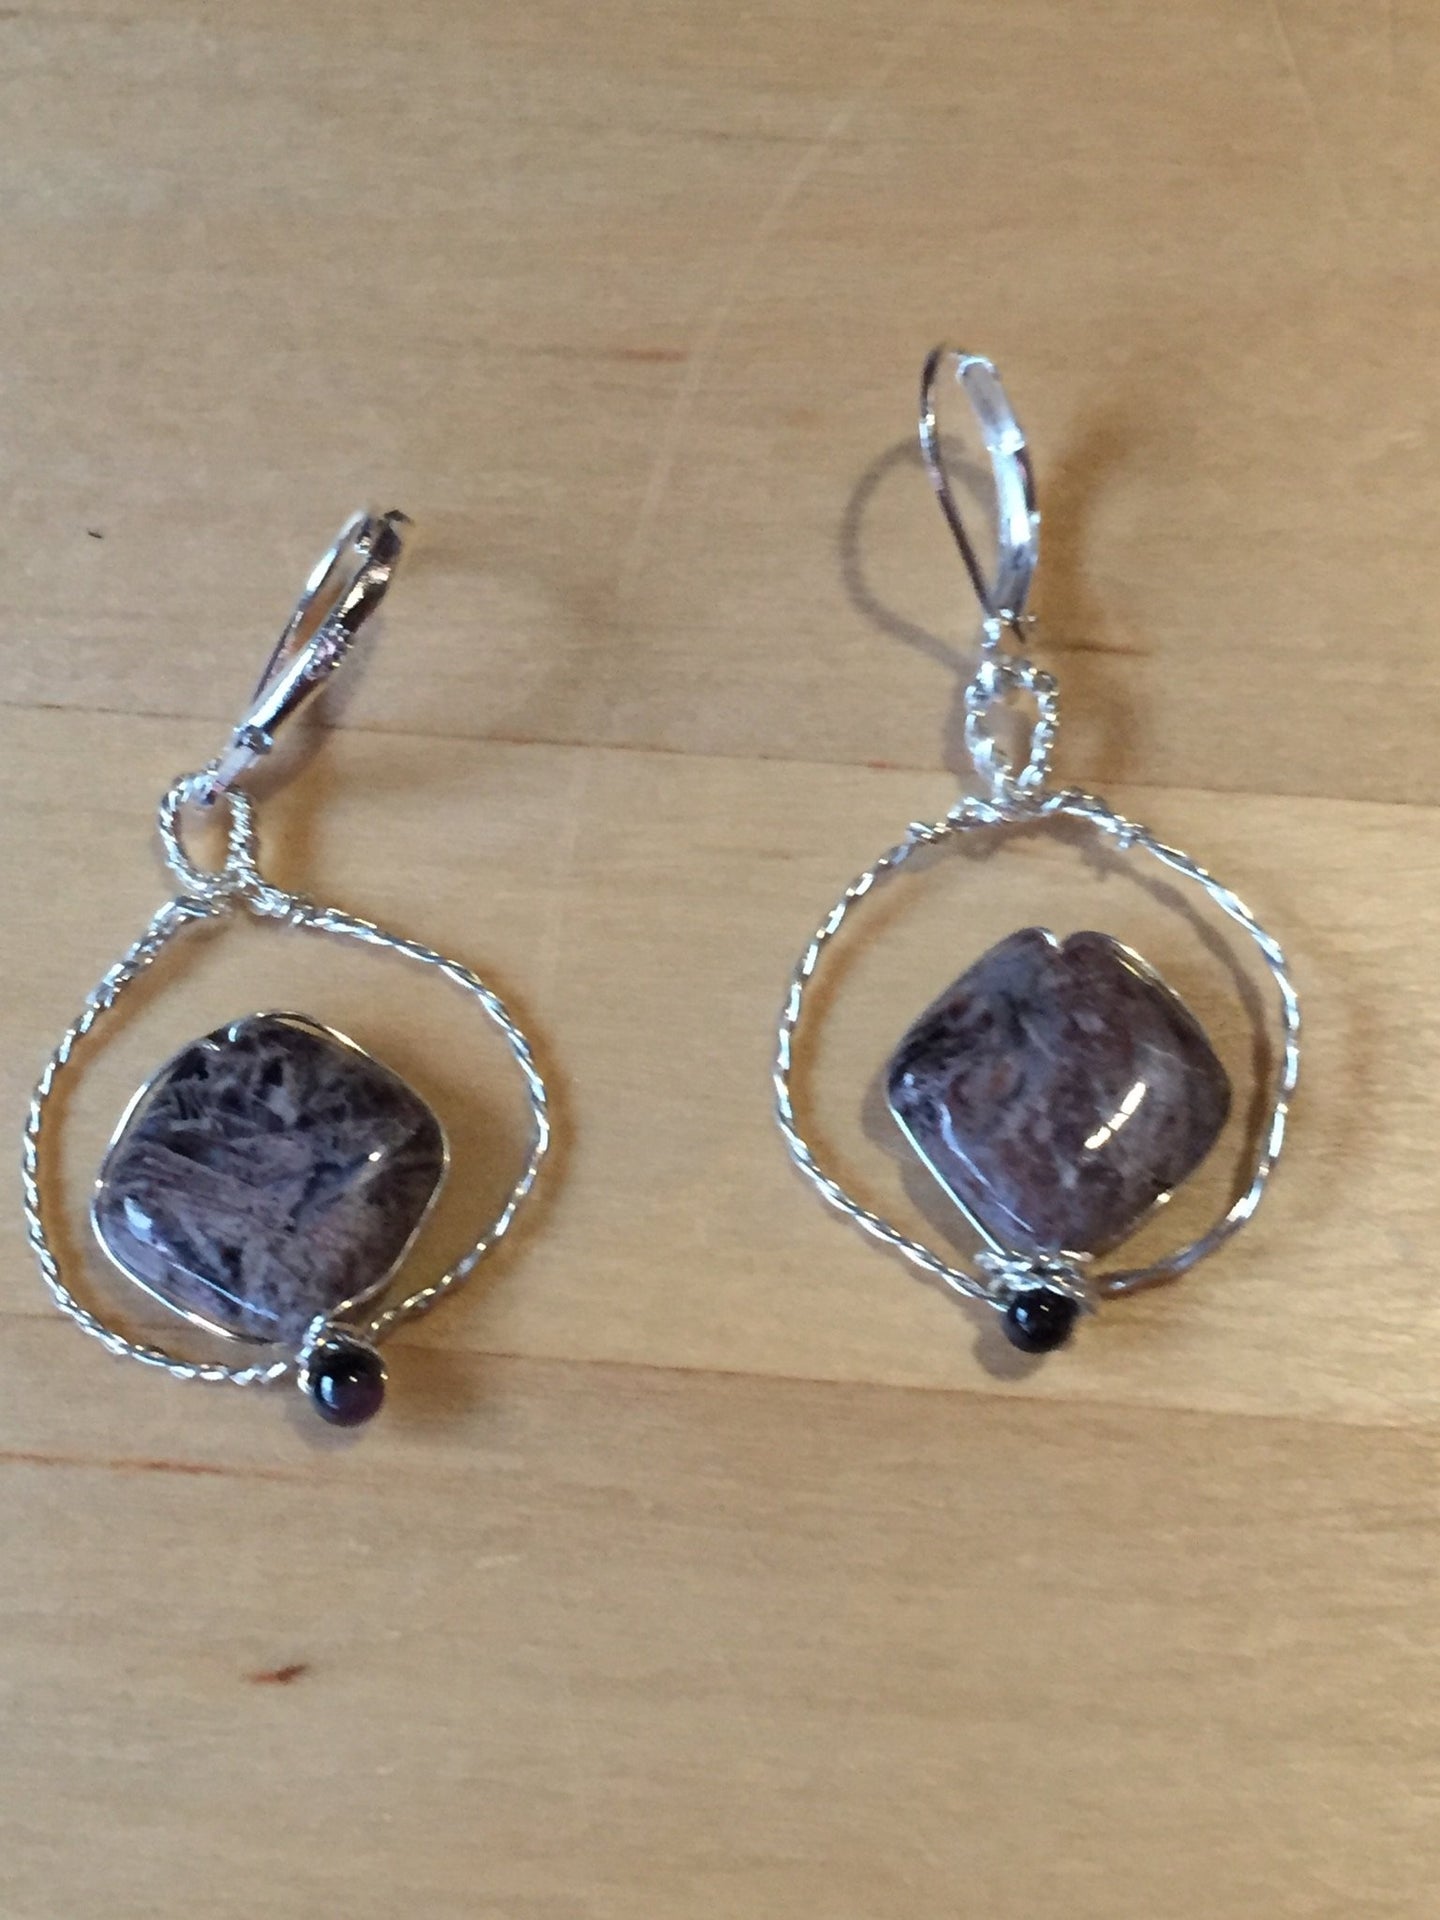 A 12mm diamond-shaped rutilated quartz bead floats inside a fine silver twisted wire circle, accented with a natural tourmaline gemstone bead at the bottom. The earring pendants are mounted on 925-stamped sterling silver leverbacks.